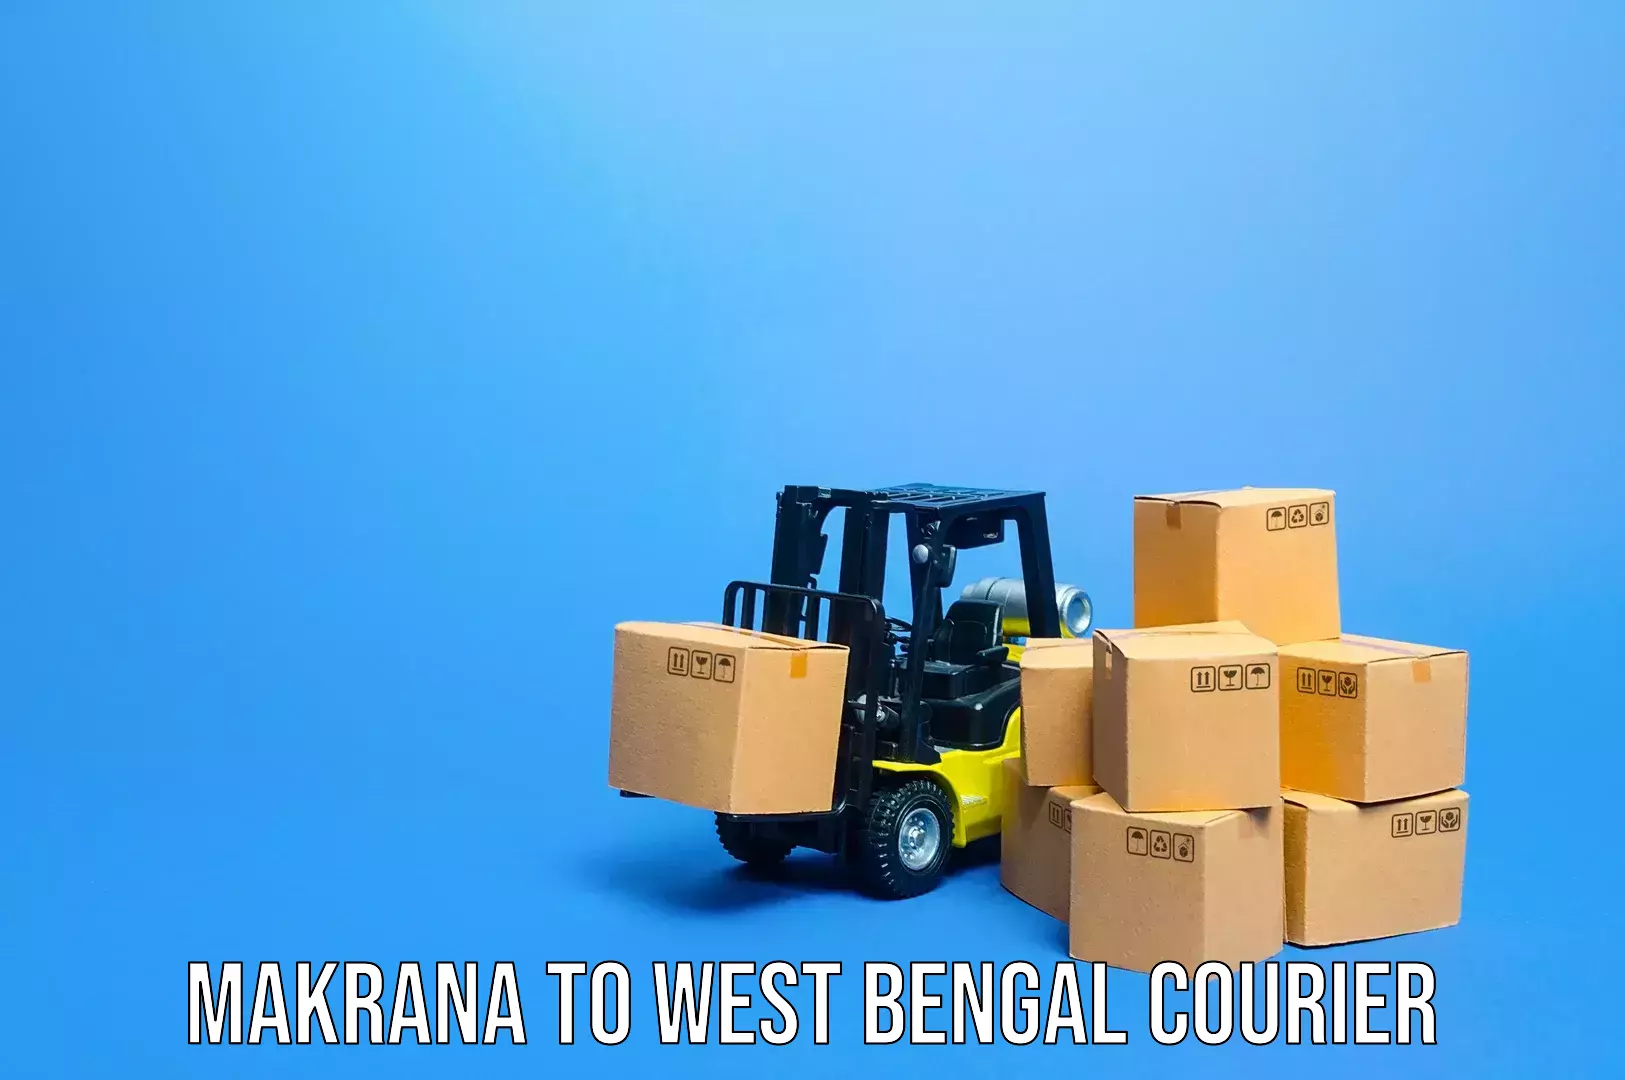 Luggage delivery system Makrana to Ama Dubi